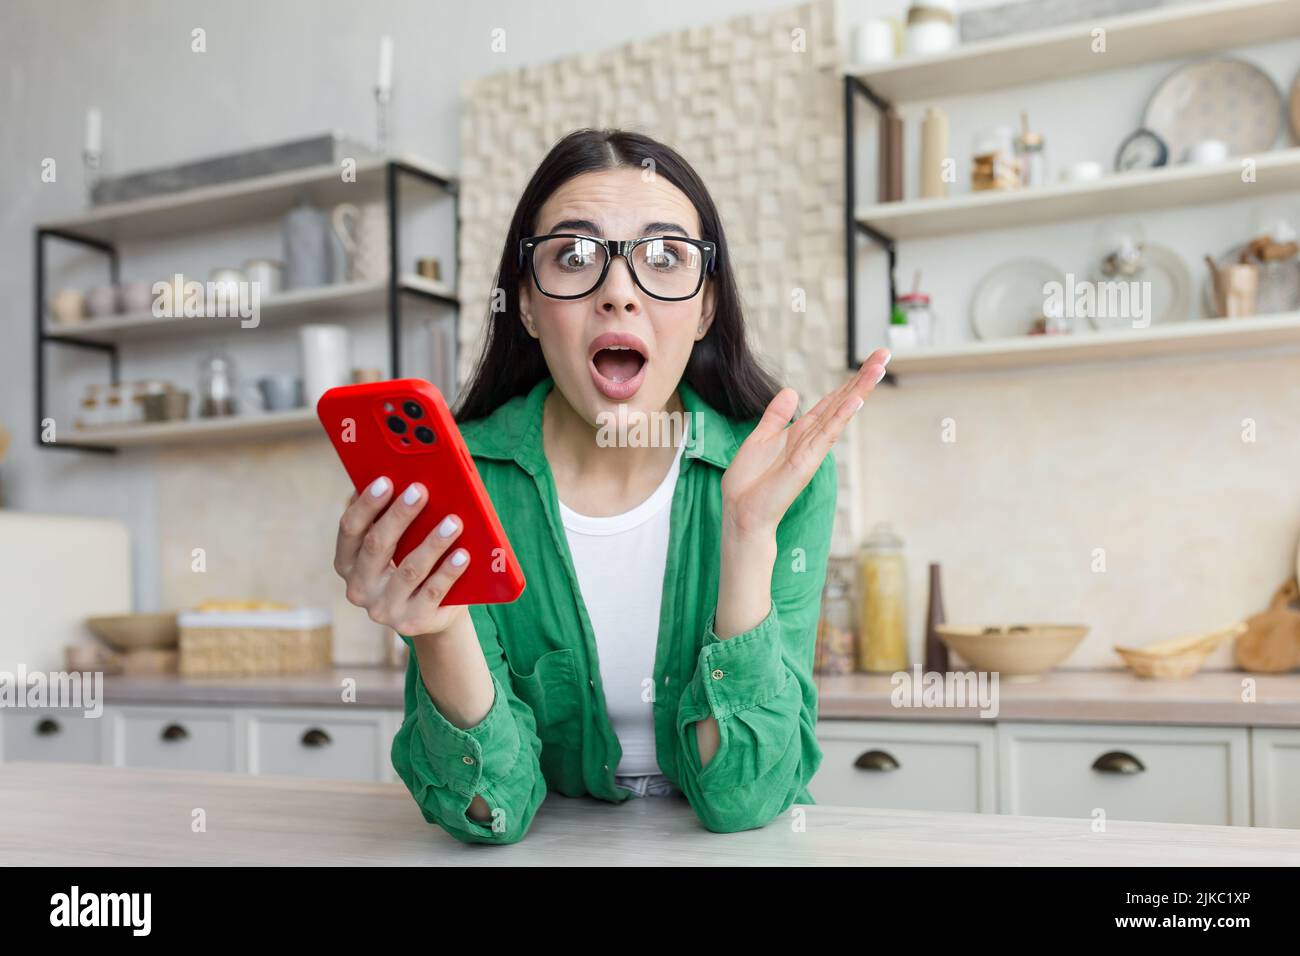 Shocked young woman looking at smartphone screen, feeling confused getting message with unbelievable news. Surprised millennial lady getting unexpected online lottery win notification at home. Stock Photo